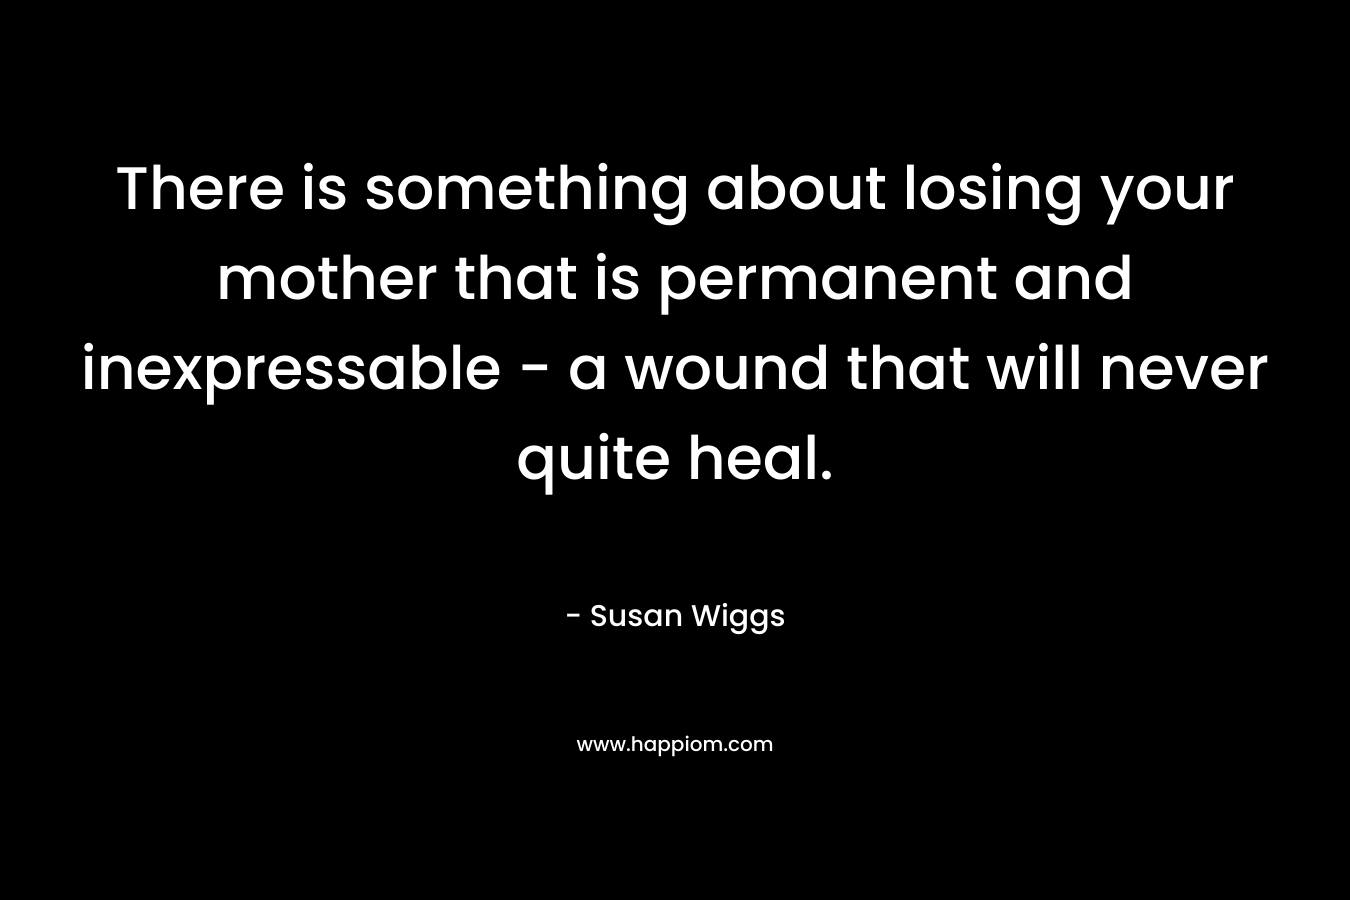 There is something about losing your mother that is permanent and inexpressable - a wound that will never quite heal.